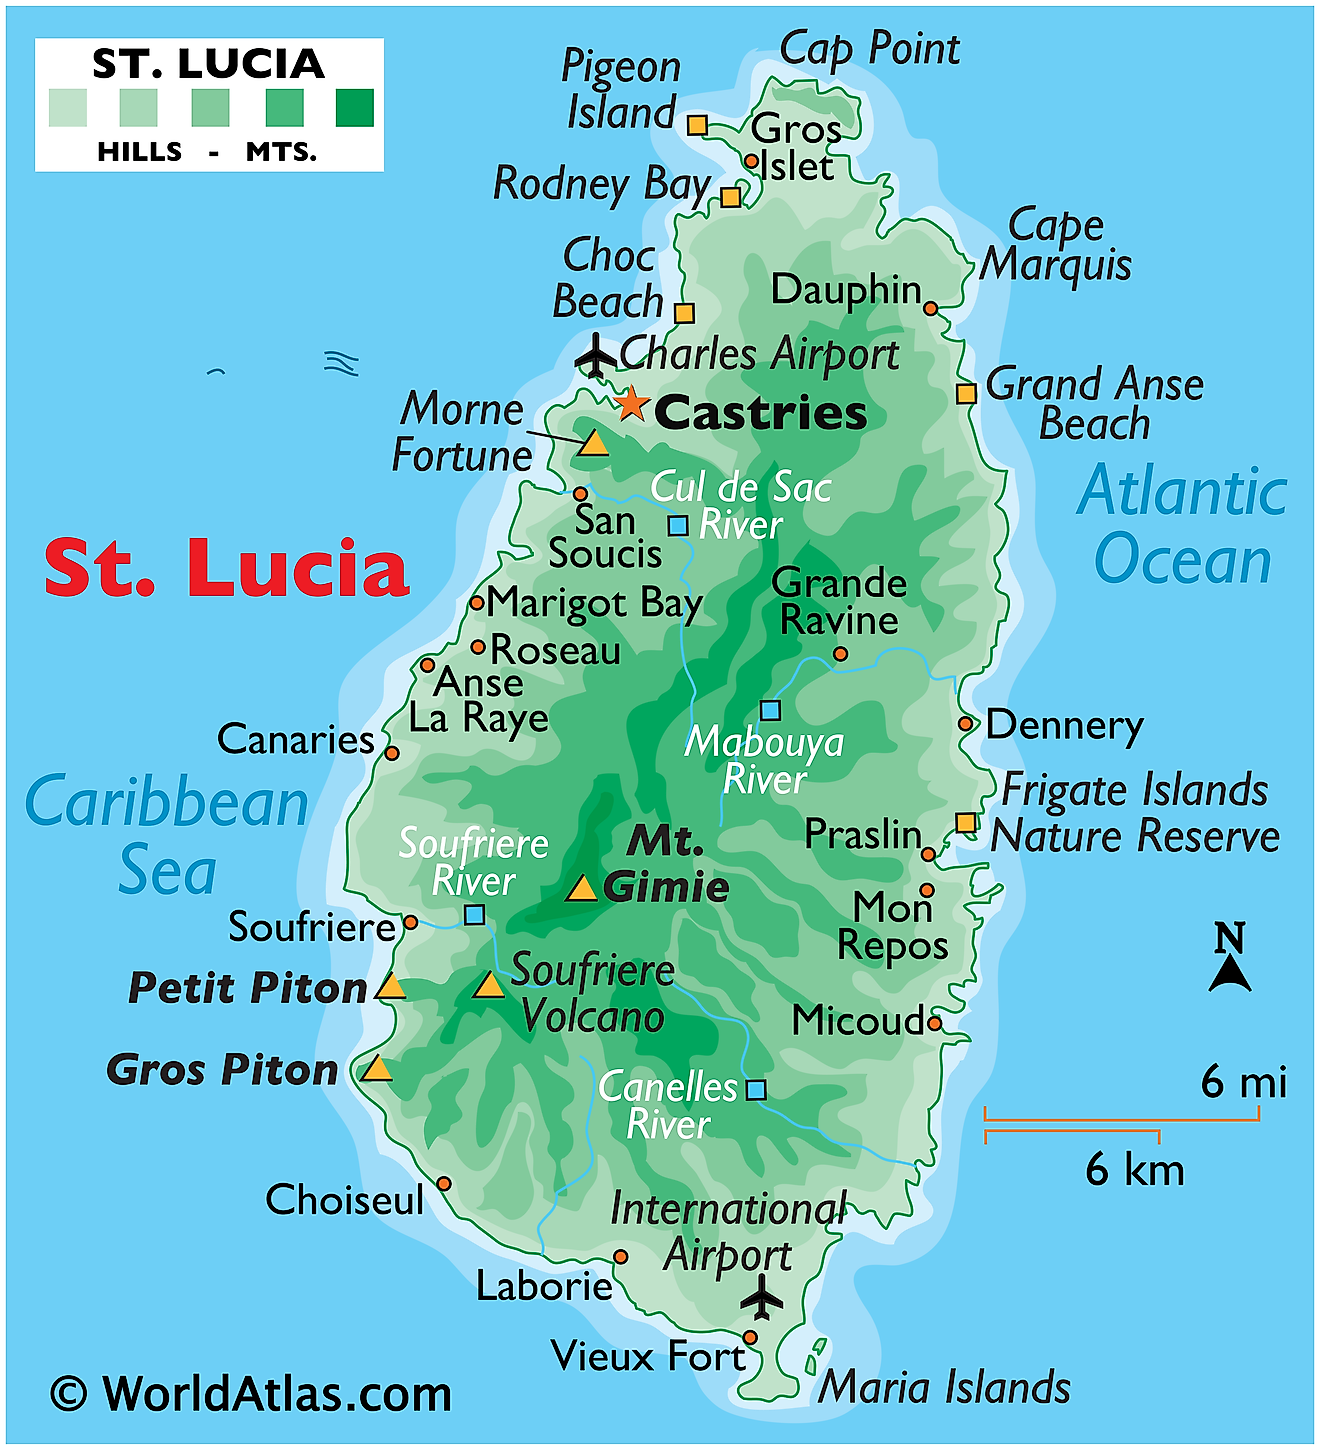 Physical Map of Saint Lucia showing relief, islands, mountains, smaller islands, volcanoes, rivers, and more.